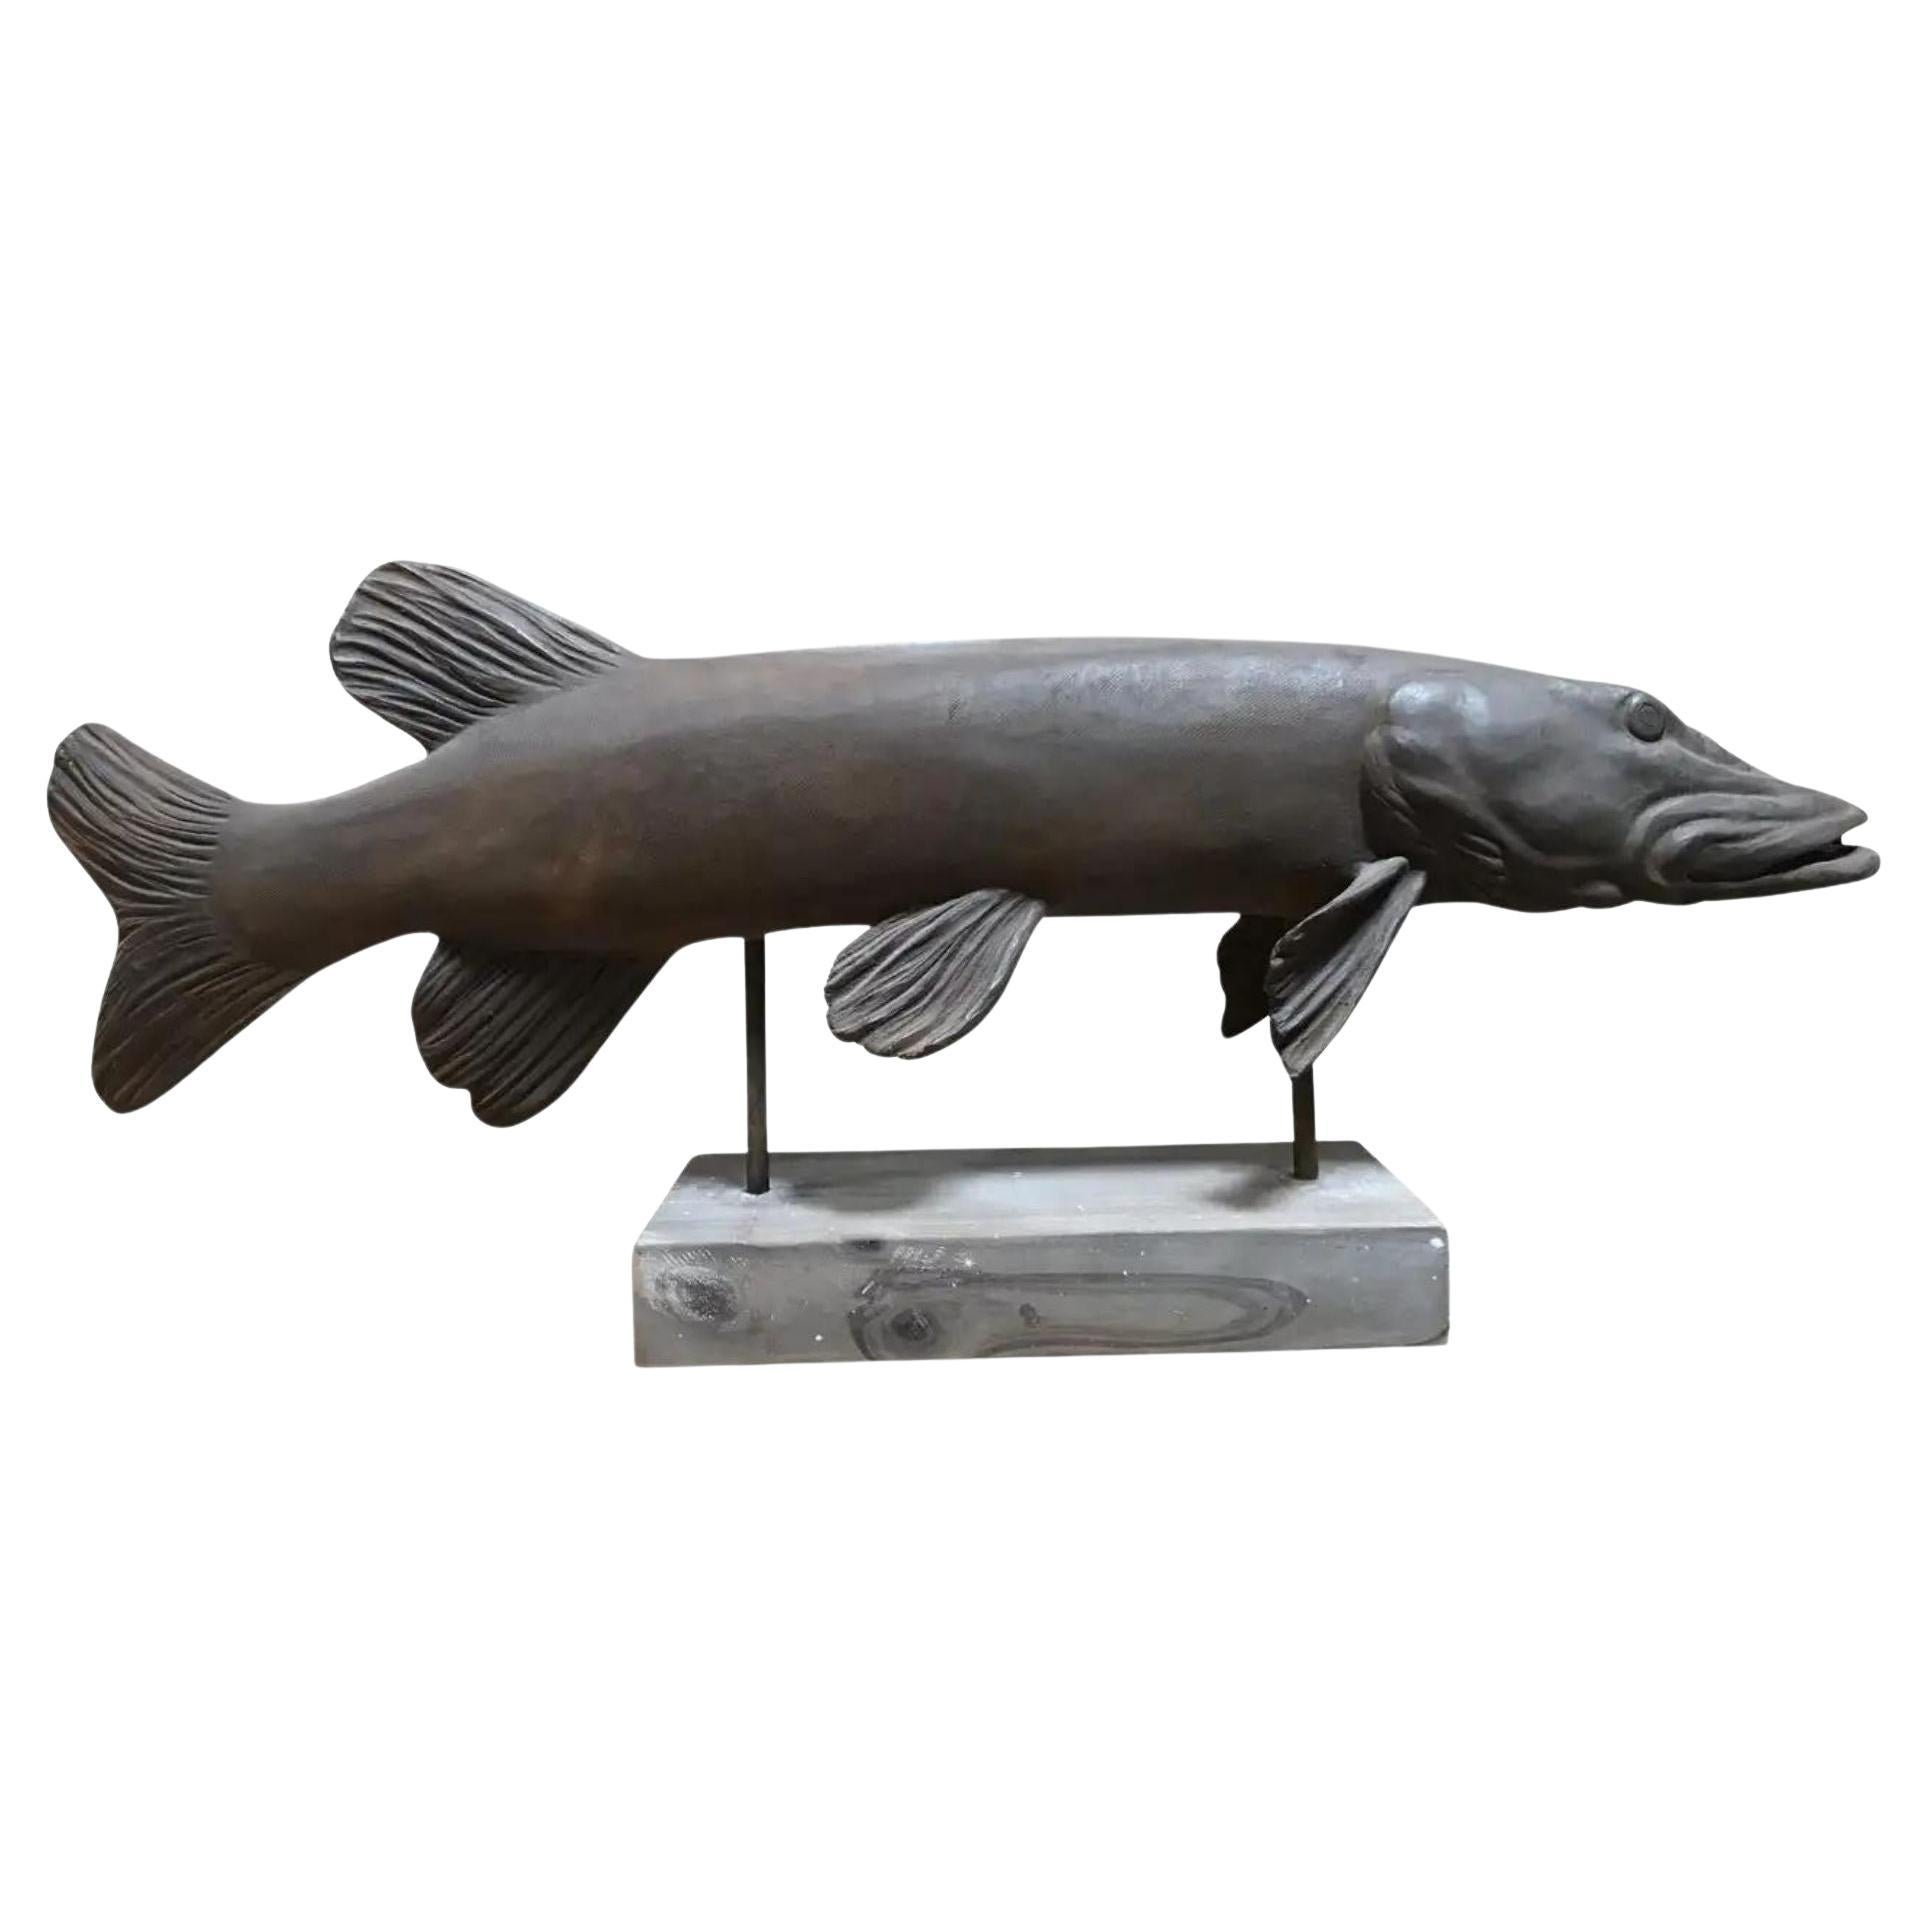 Cast Pike Fish Sculpture Mounted on Wood